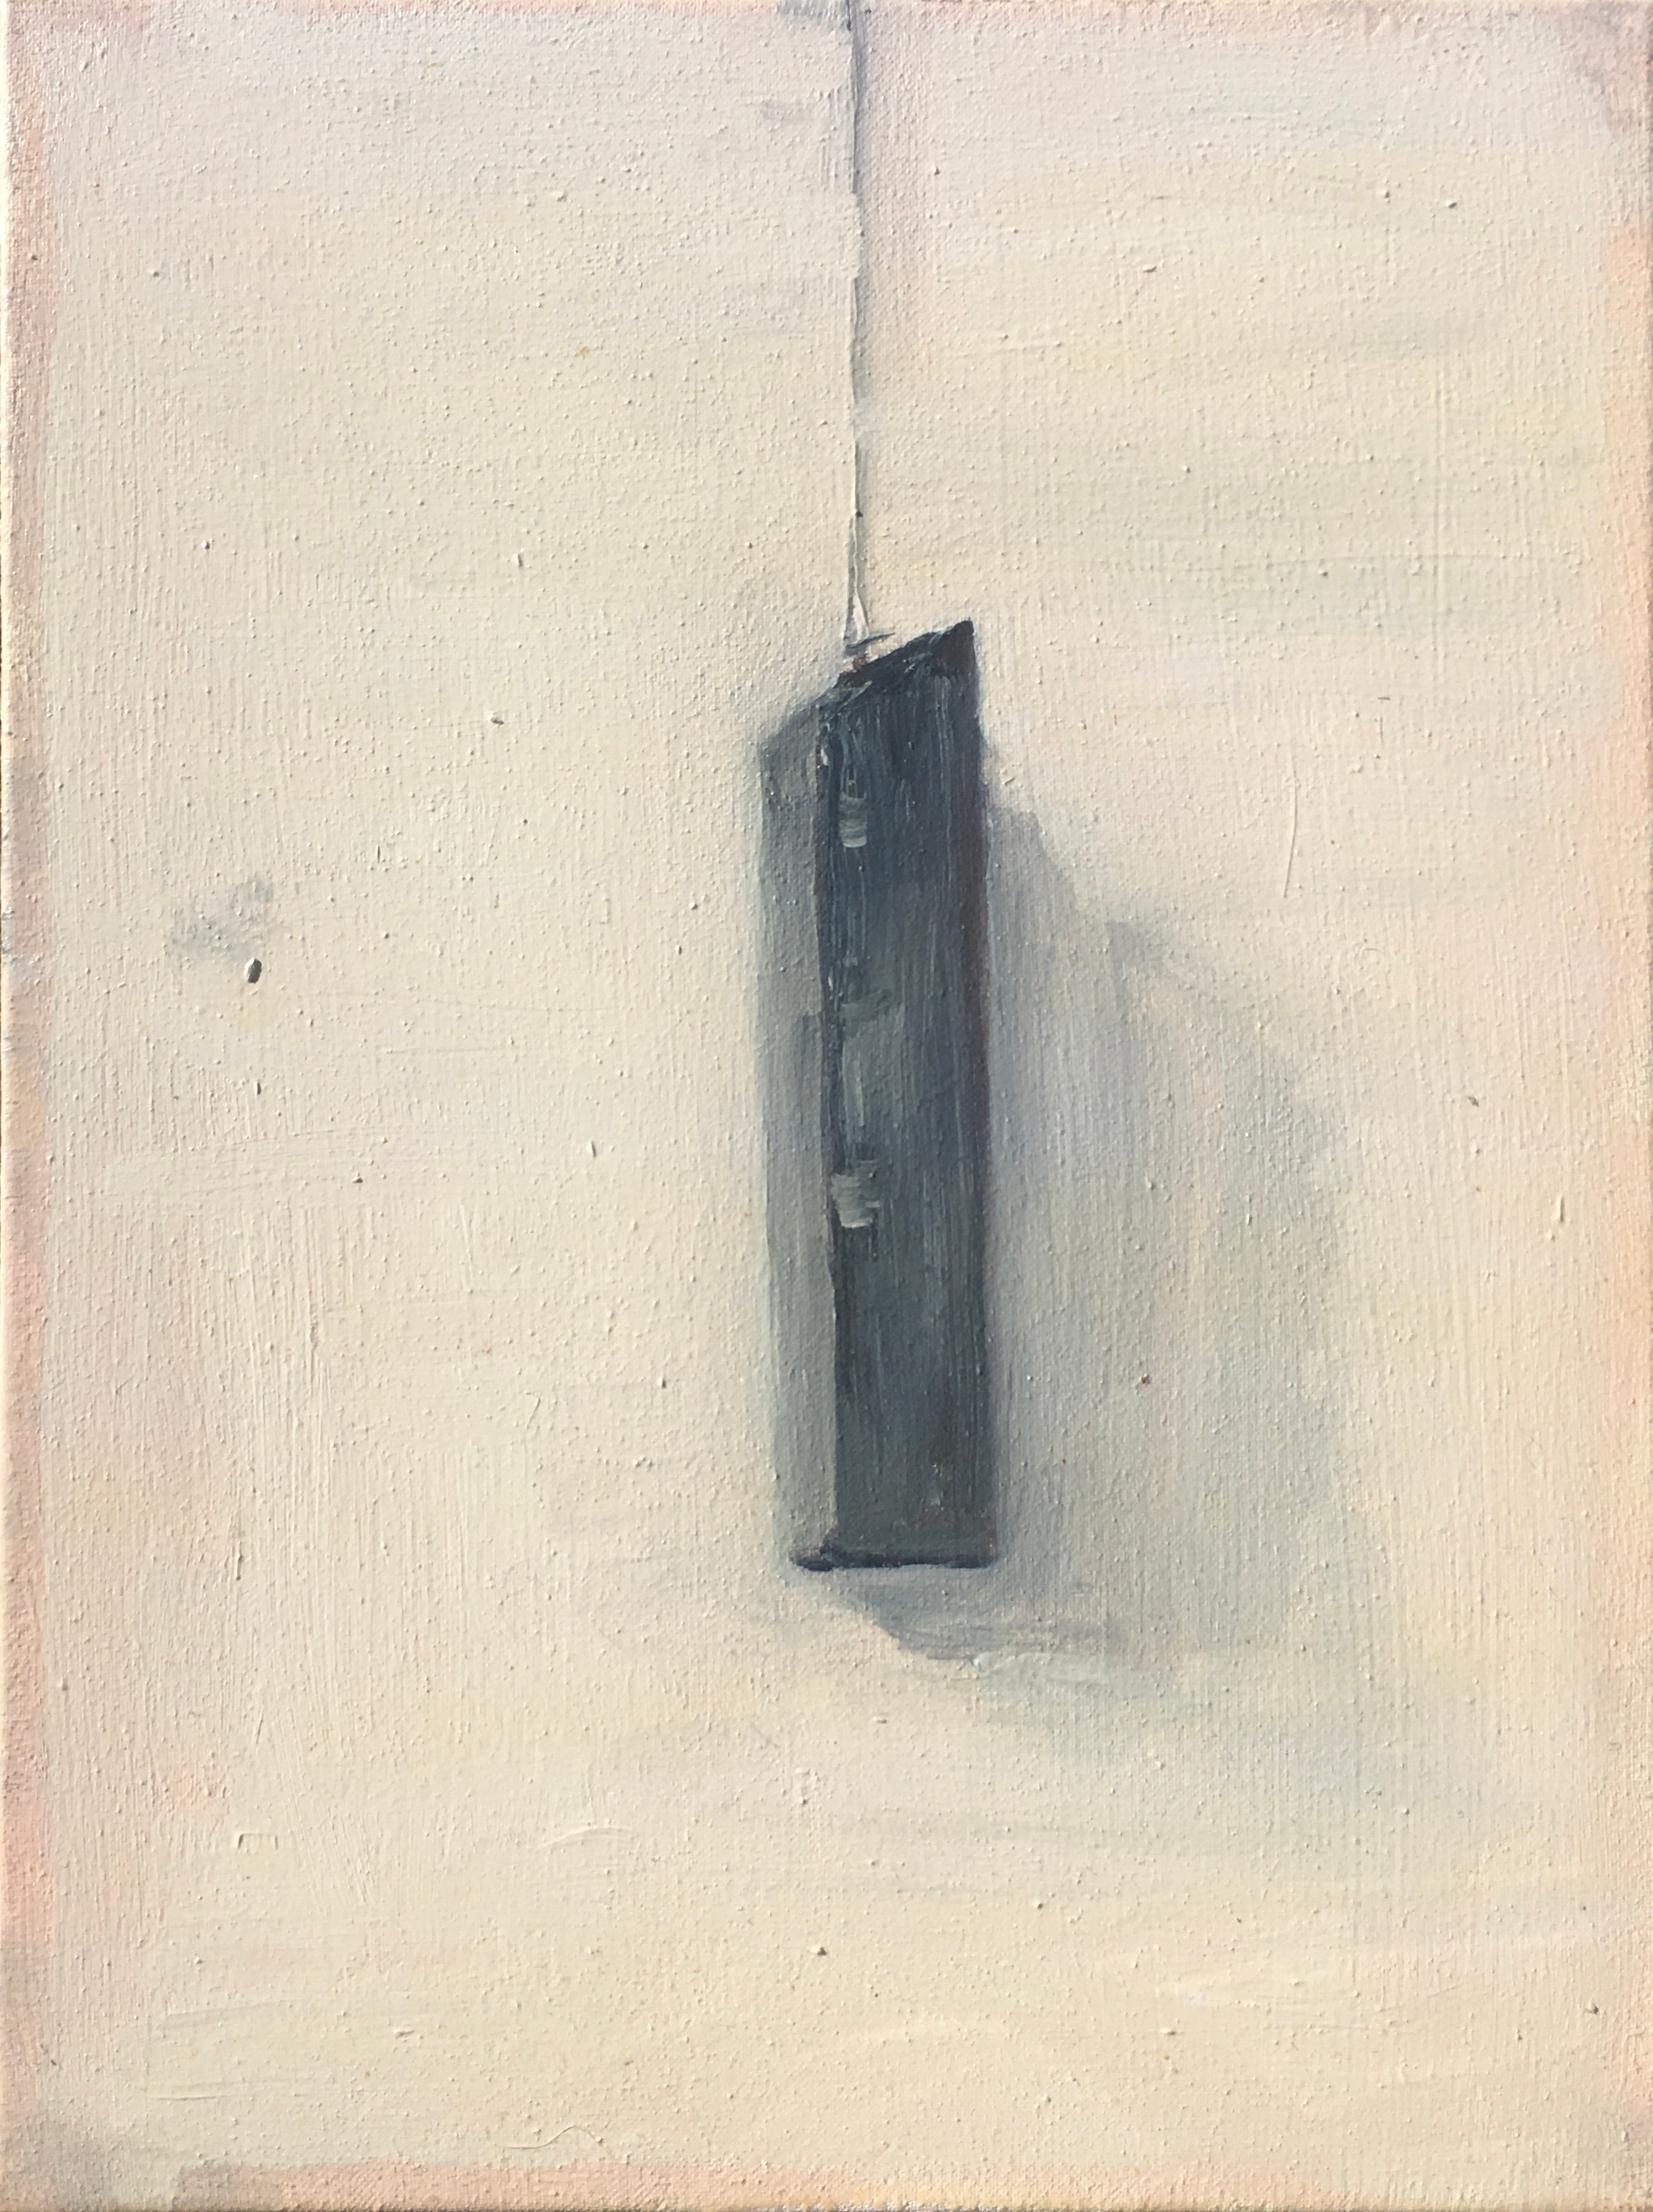 Piece of Wood on String,40x30cm Oil on Canvas 2011